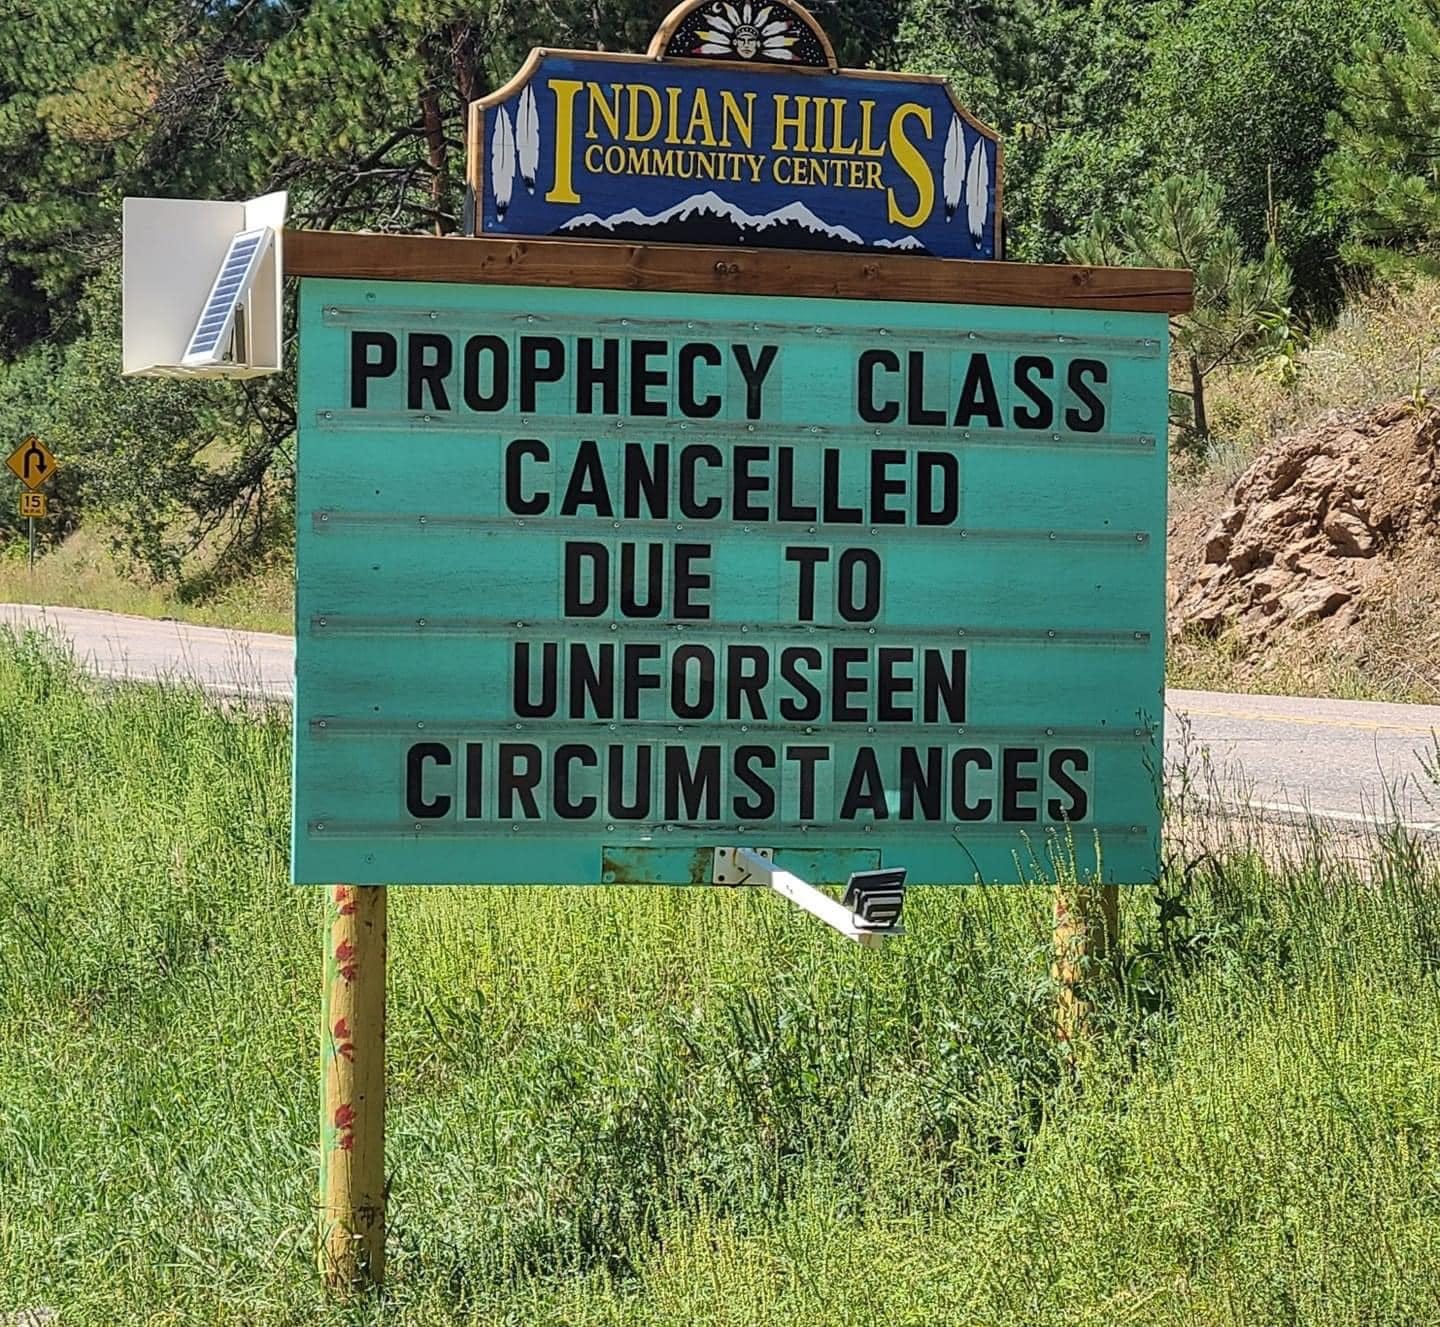 May be an image of outdoors and text that says 'NDIAN HLLS MINN HILLO COMMUNITY CENTER PROPHECY CLASS CANCELLED DUE TO UNFORS EEN CIRCUM CIRCUMSTANCES'